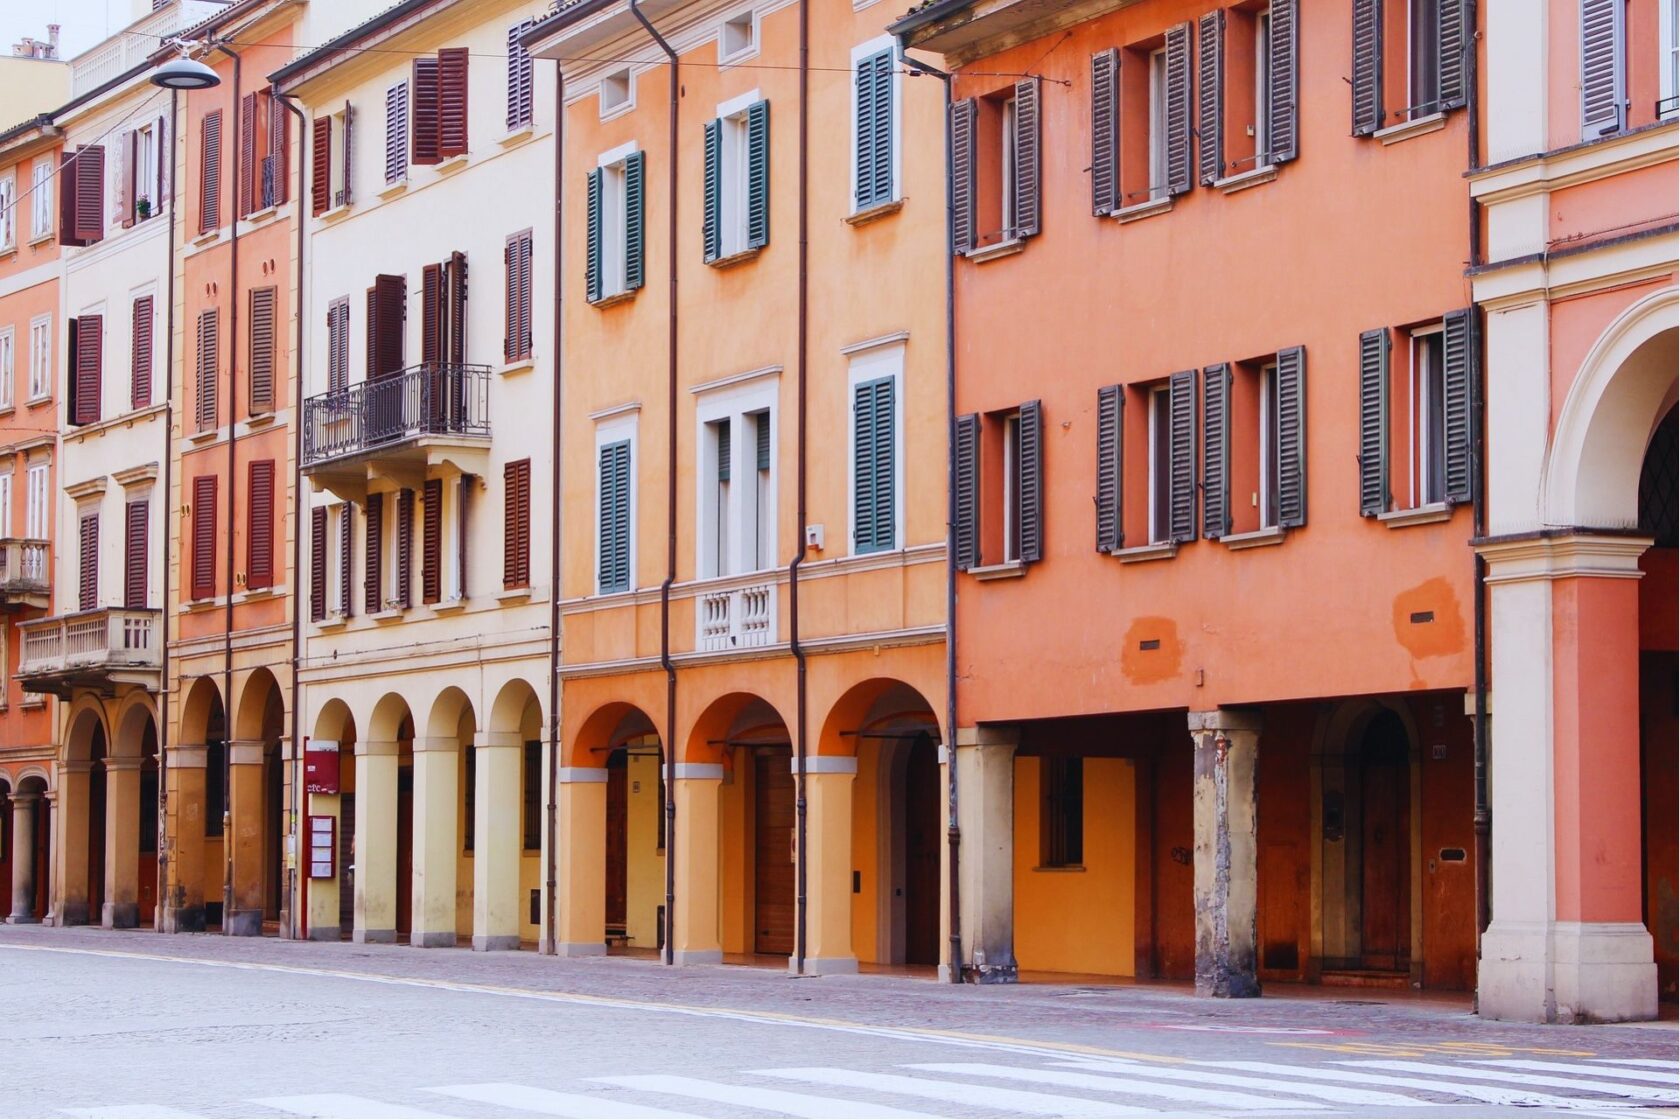 Building and streets in Bologna, Italy (an Atlantis site).